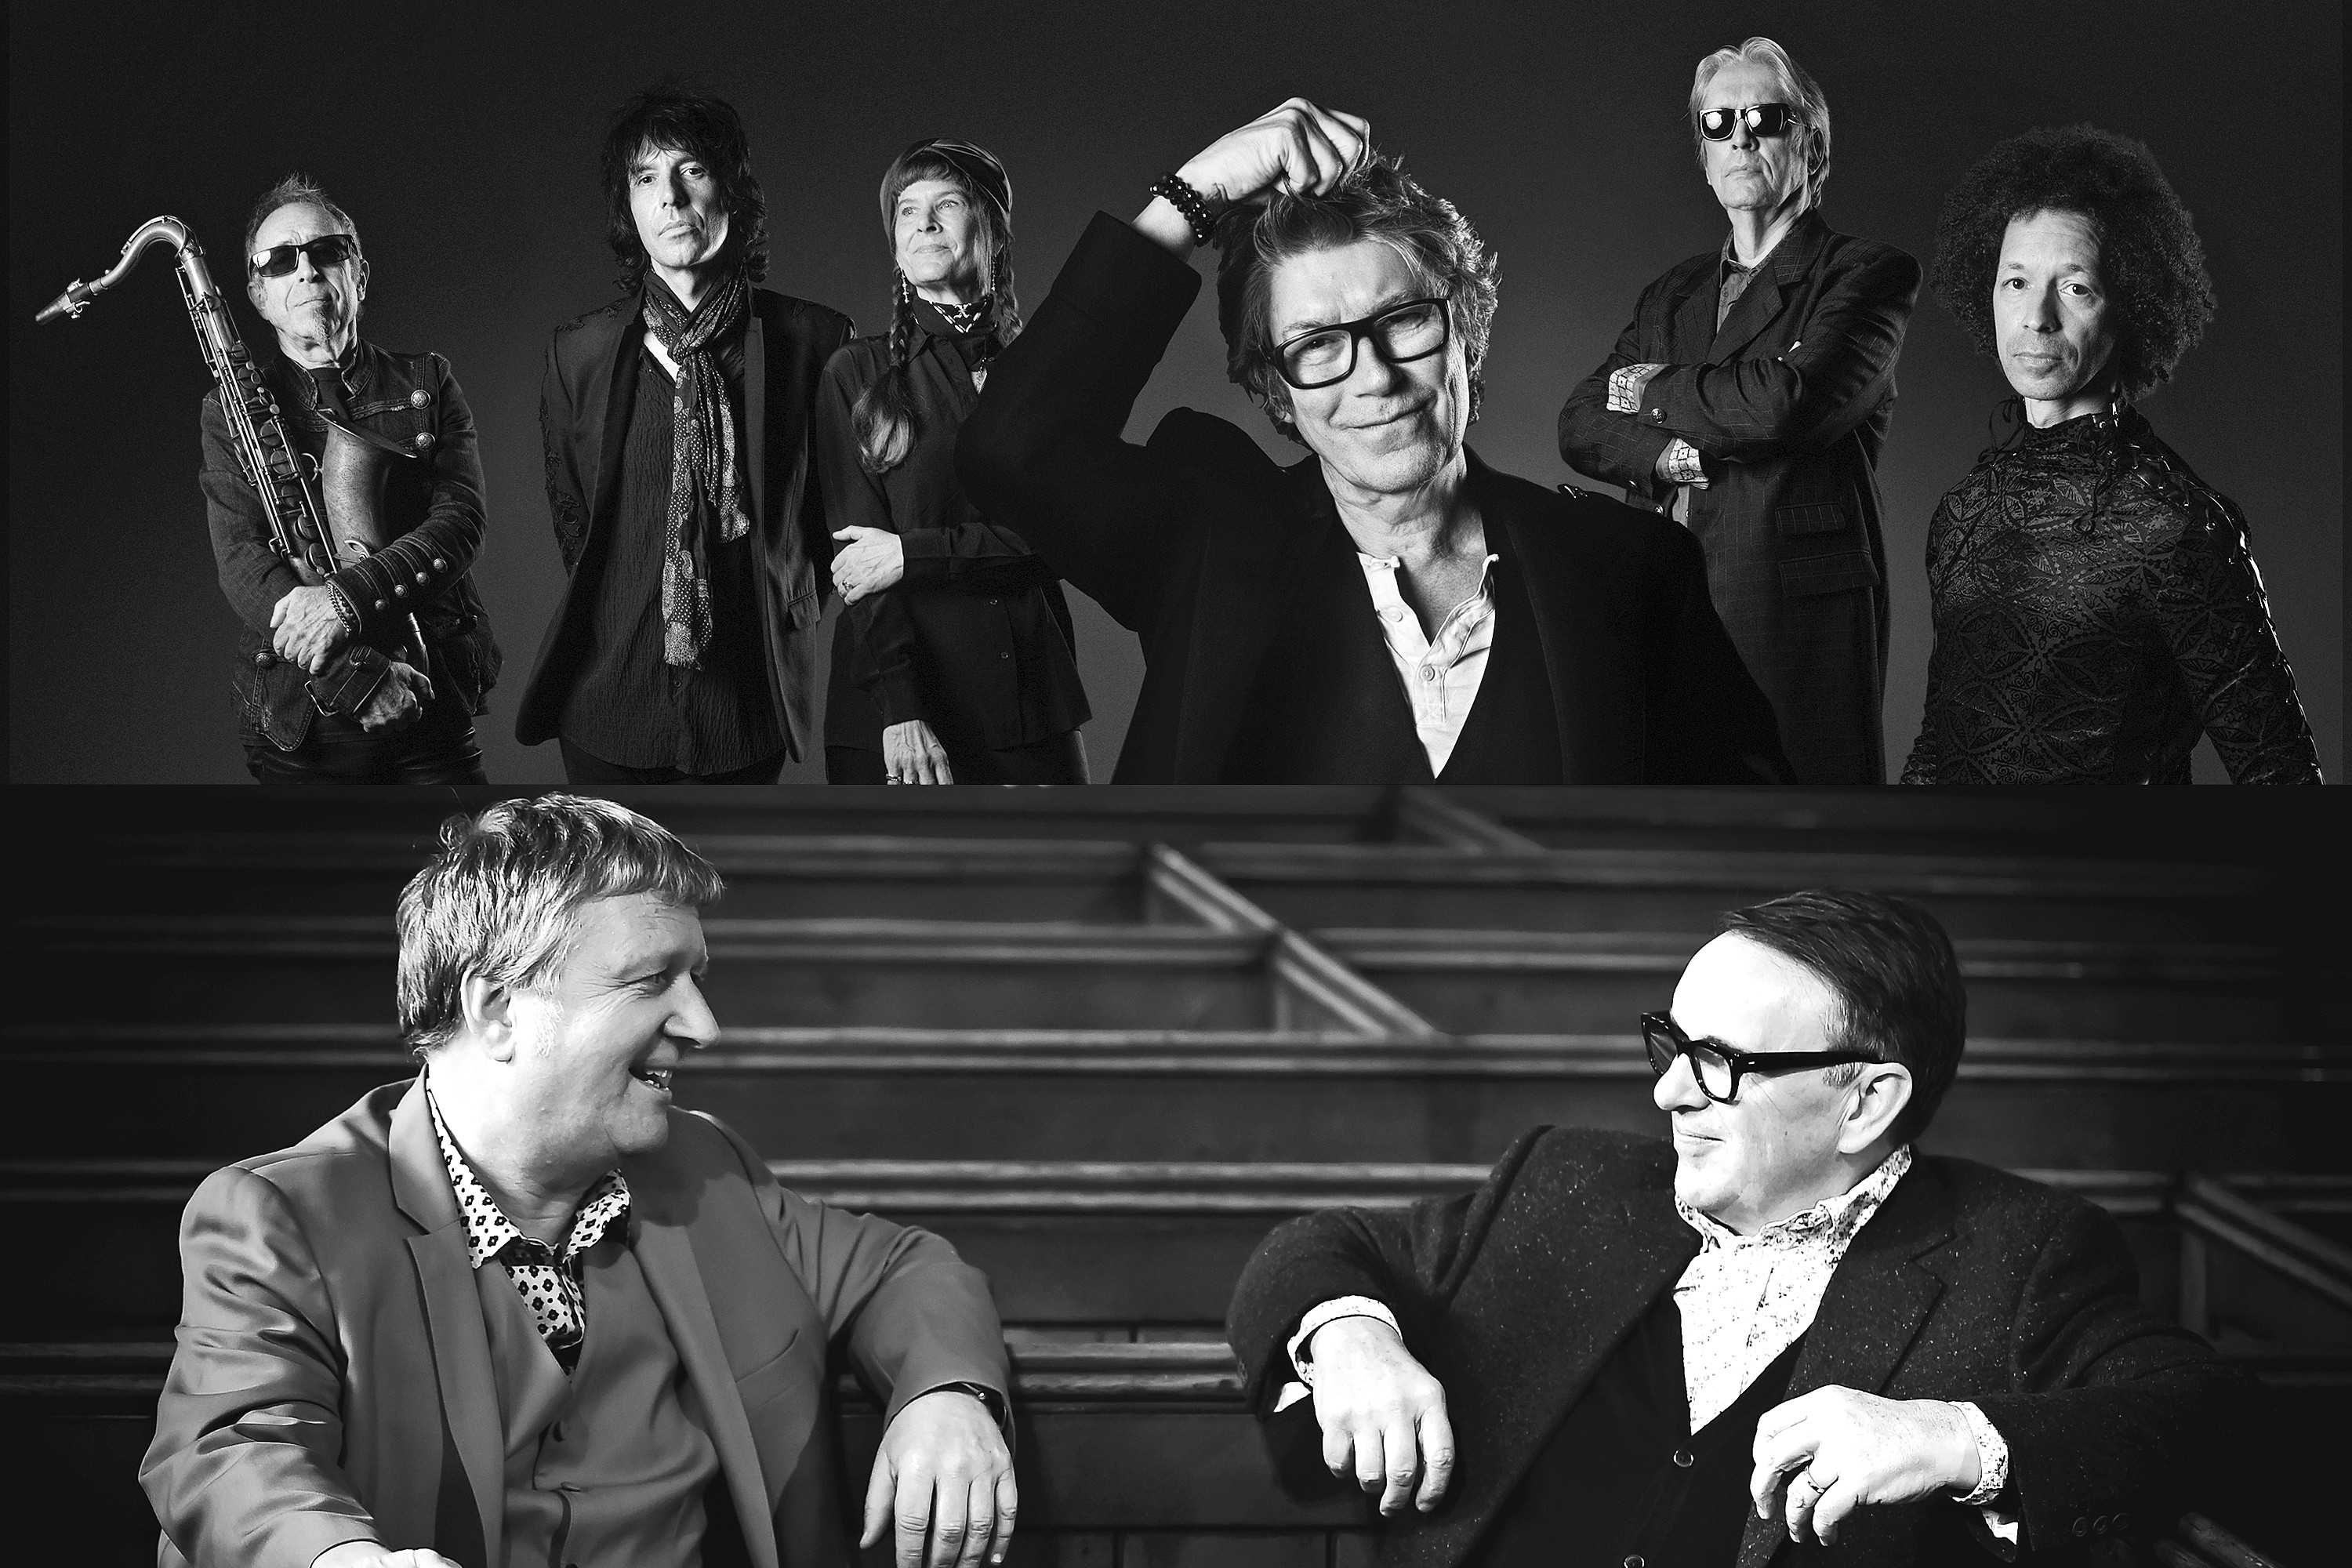 Eighties Icons The Psychedelic Furs And Squeeze Share The Bill At Vina Robles Amphitheatre On 9197